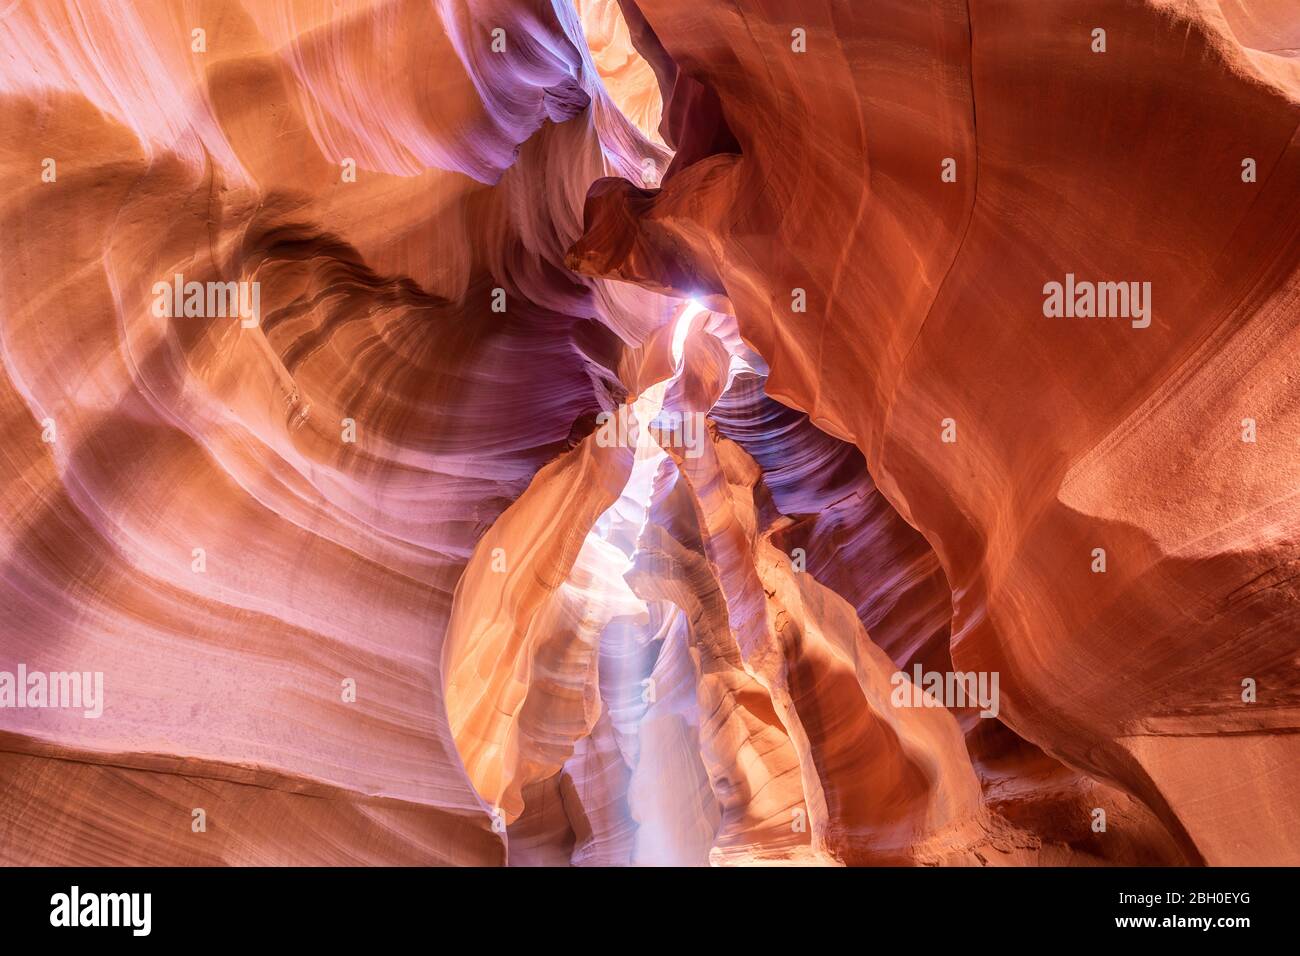 Wide angle view of the vault of the Upper Antelope Canyon, with a beam of light breaking in from an opening Stock Photo